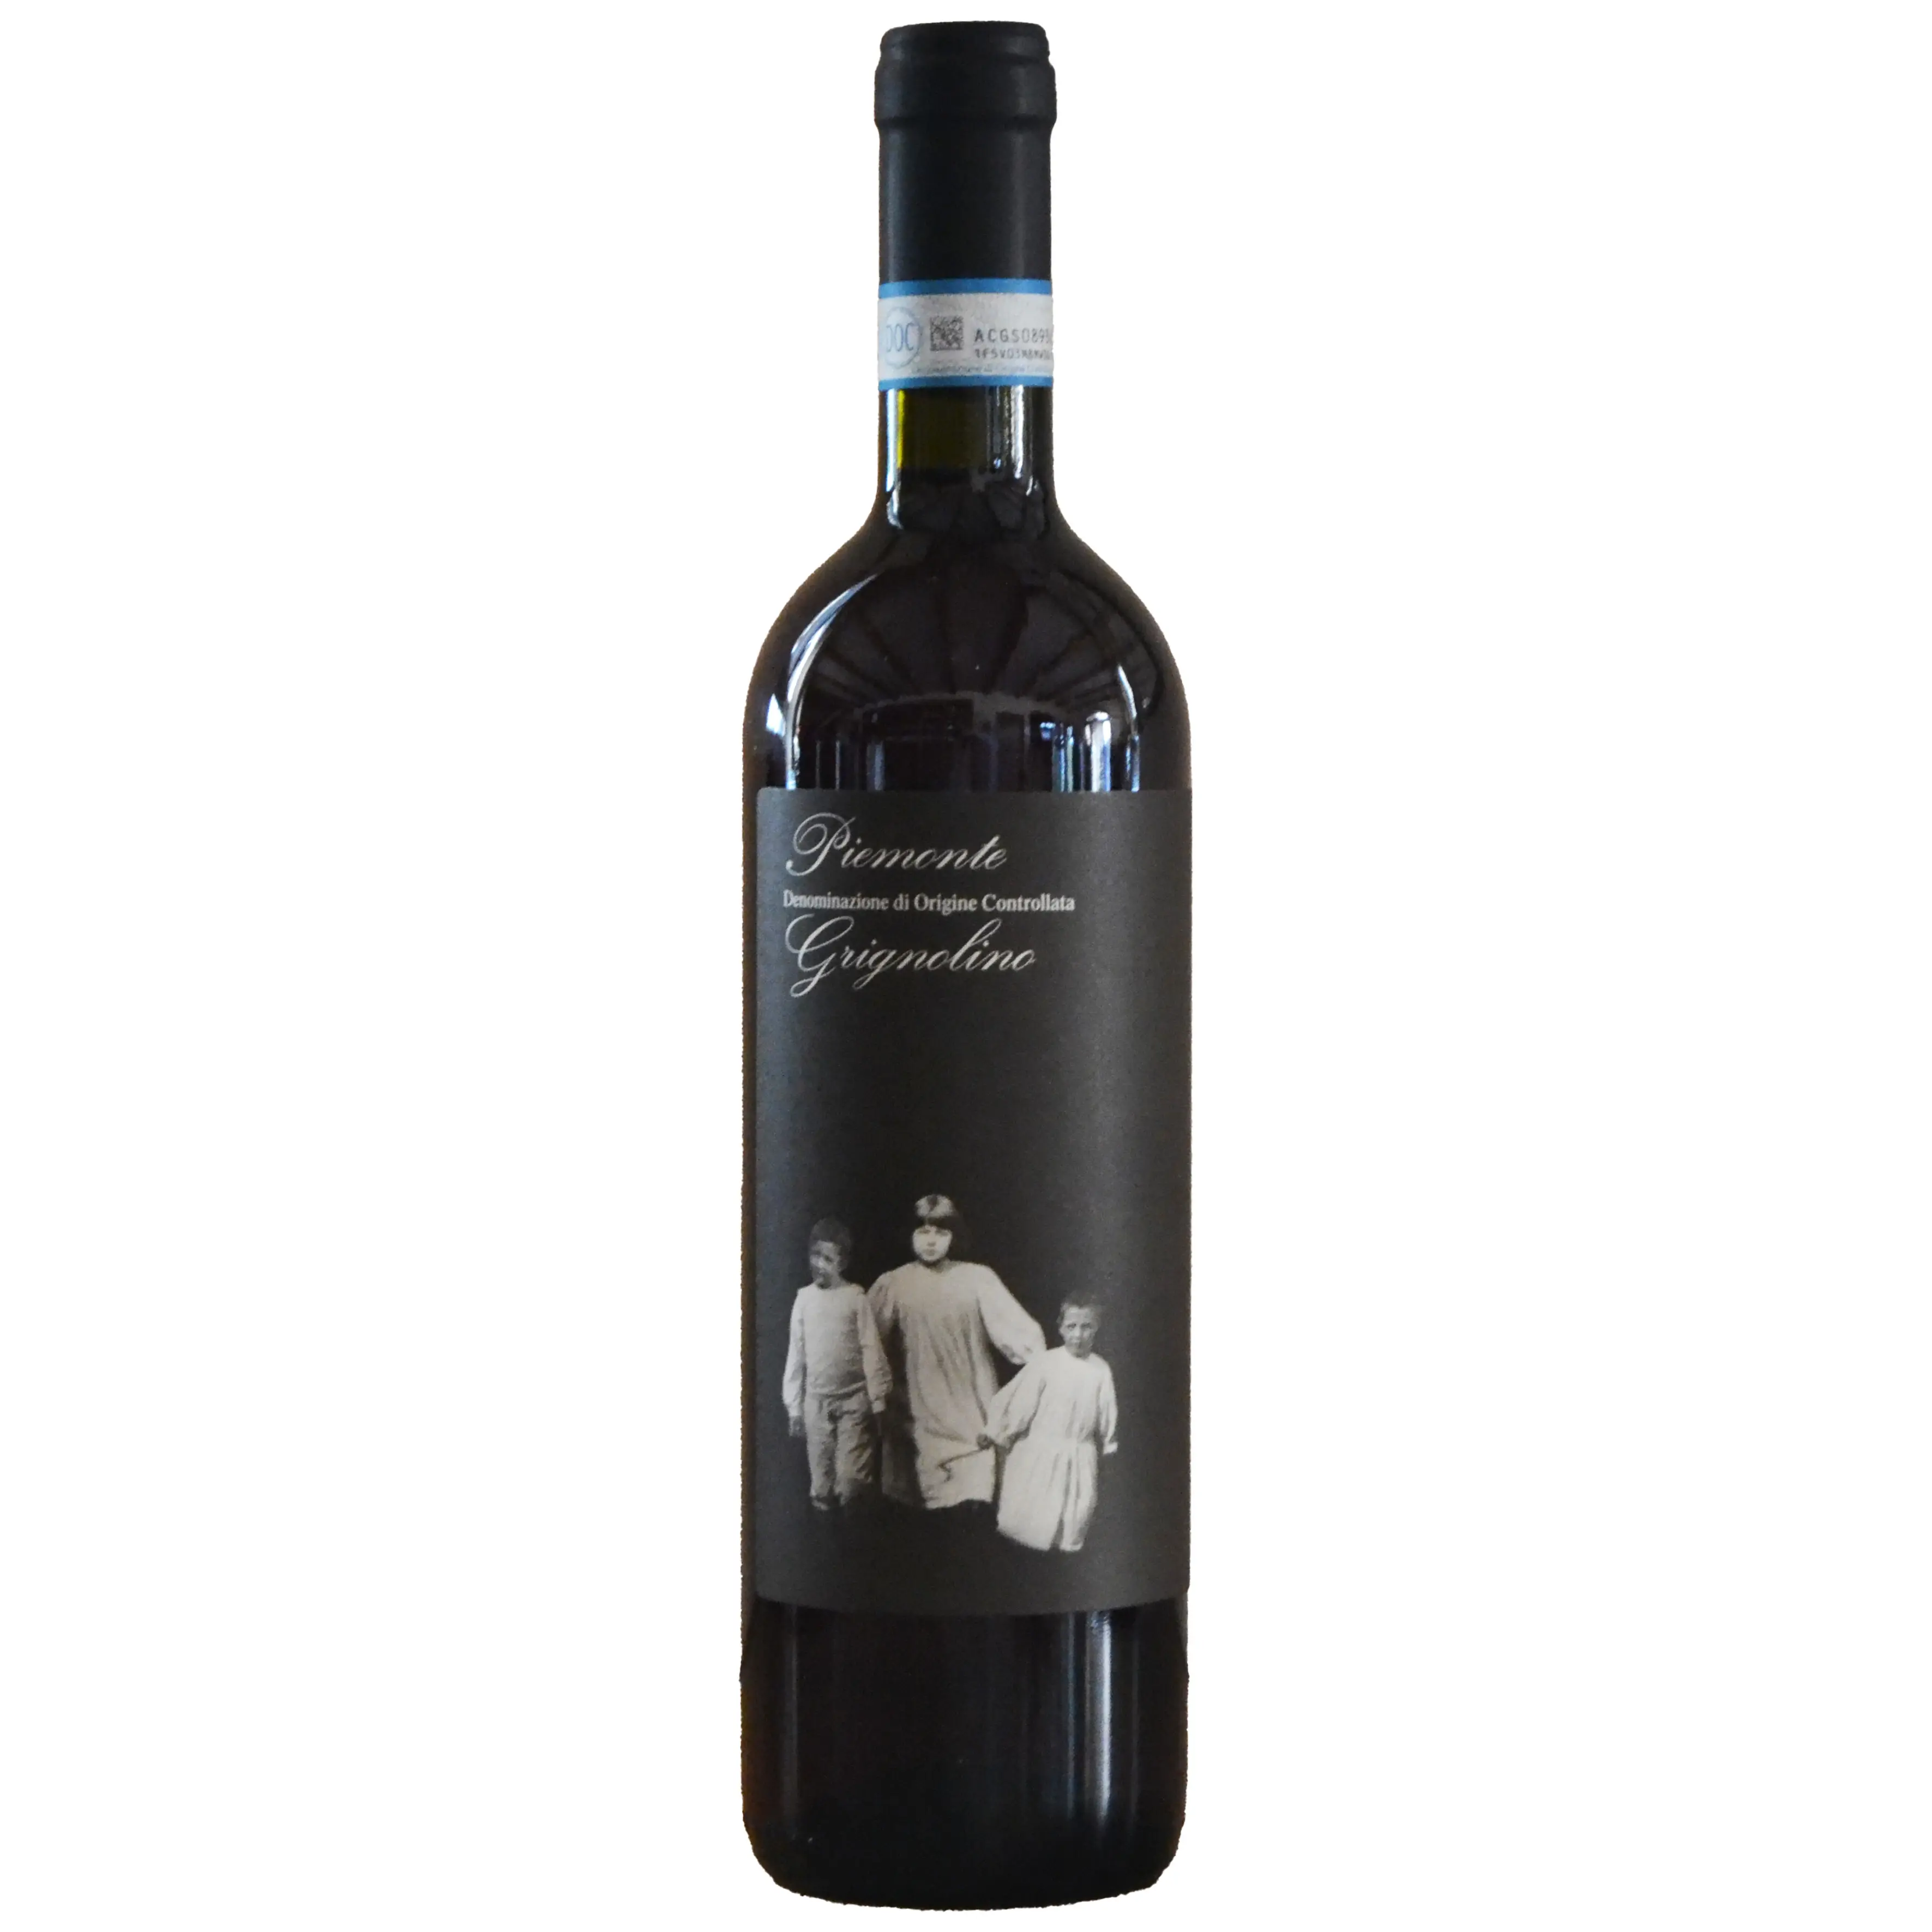 Quality Italian red wine Piedmont Piemonte DOC Grignolino 75 cl glass for sale and export